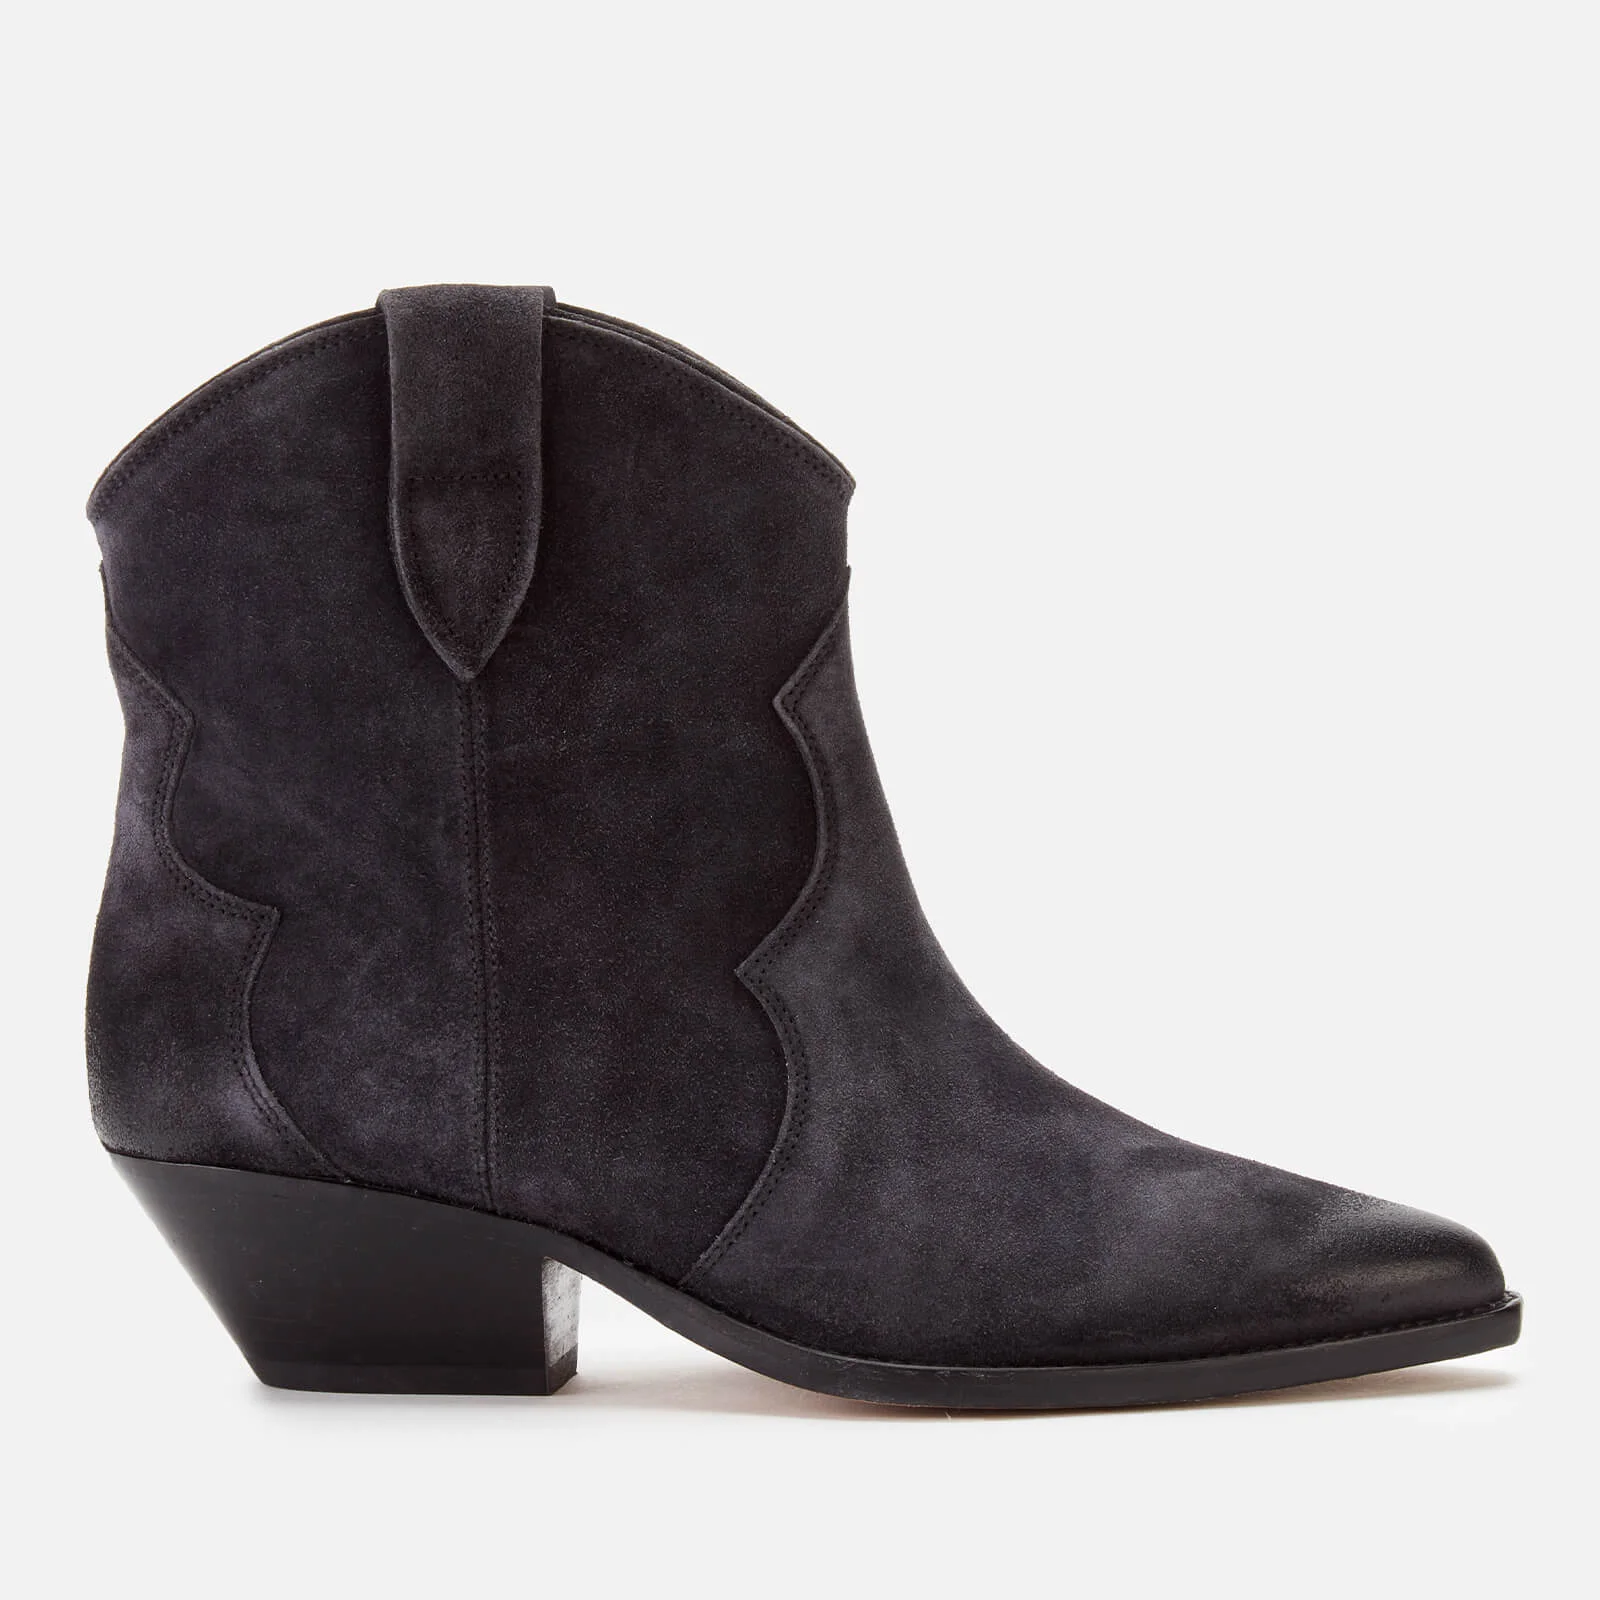 Isabel Marant Women's Dewina Low Heel Ankle Boots - Faded Black Image 1